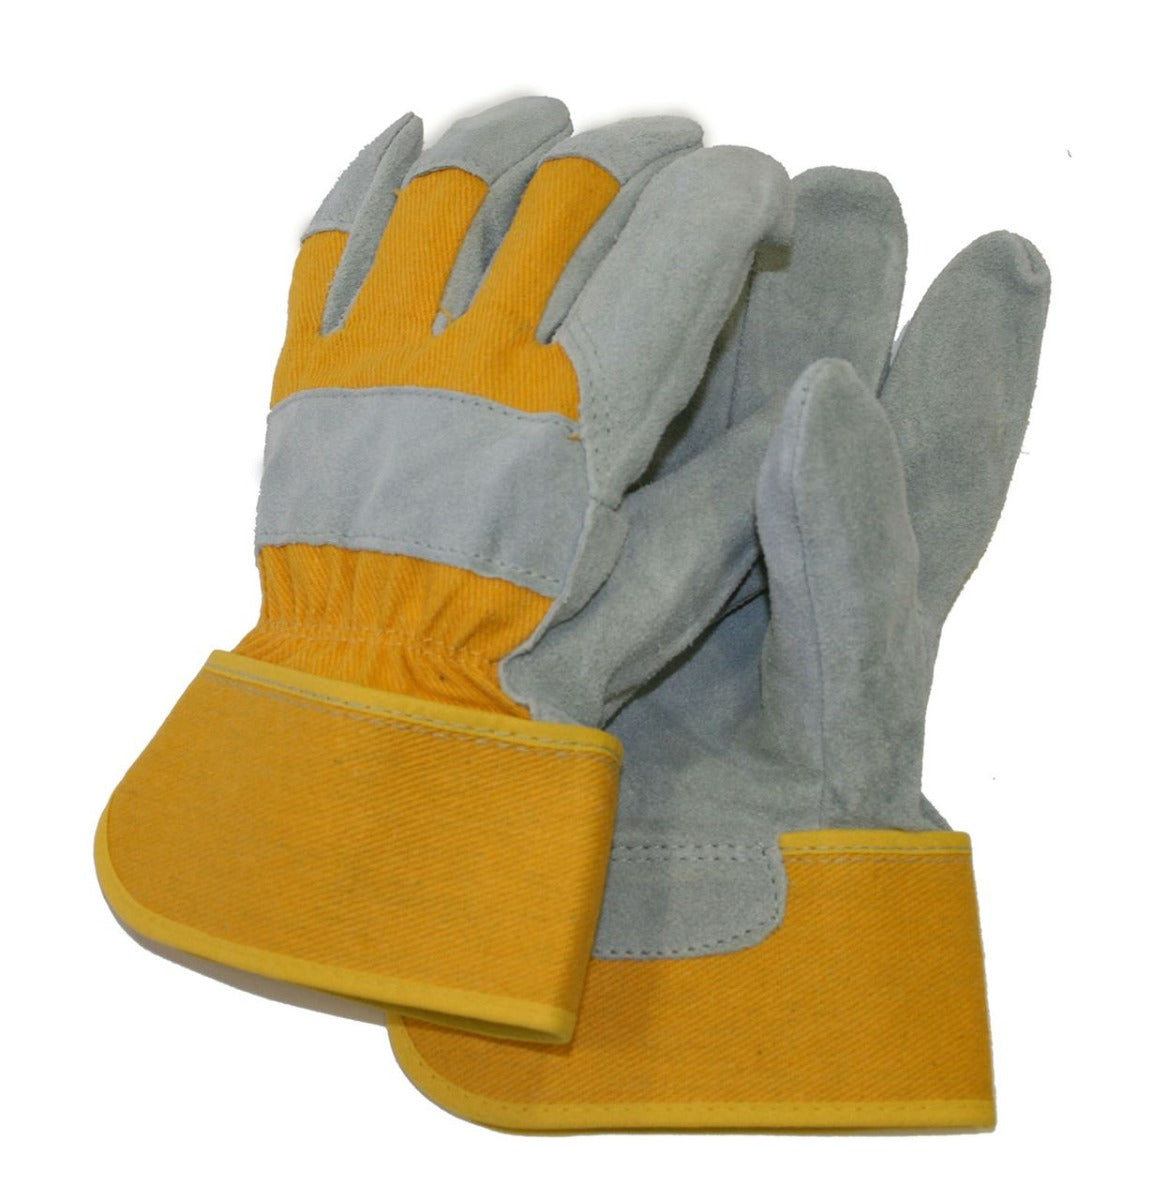 Town & Country General Purpose Rigger Gloves